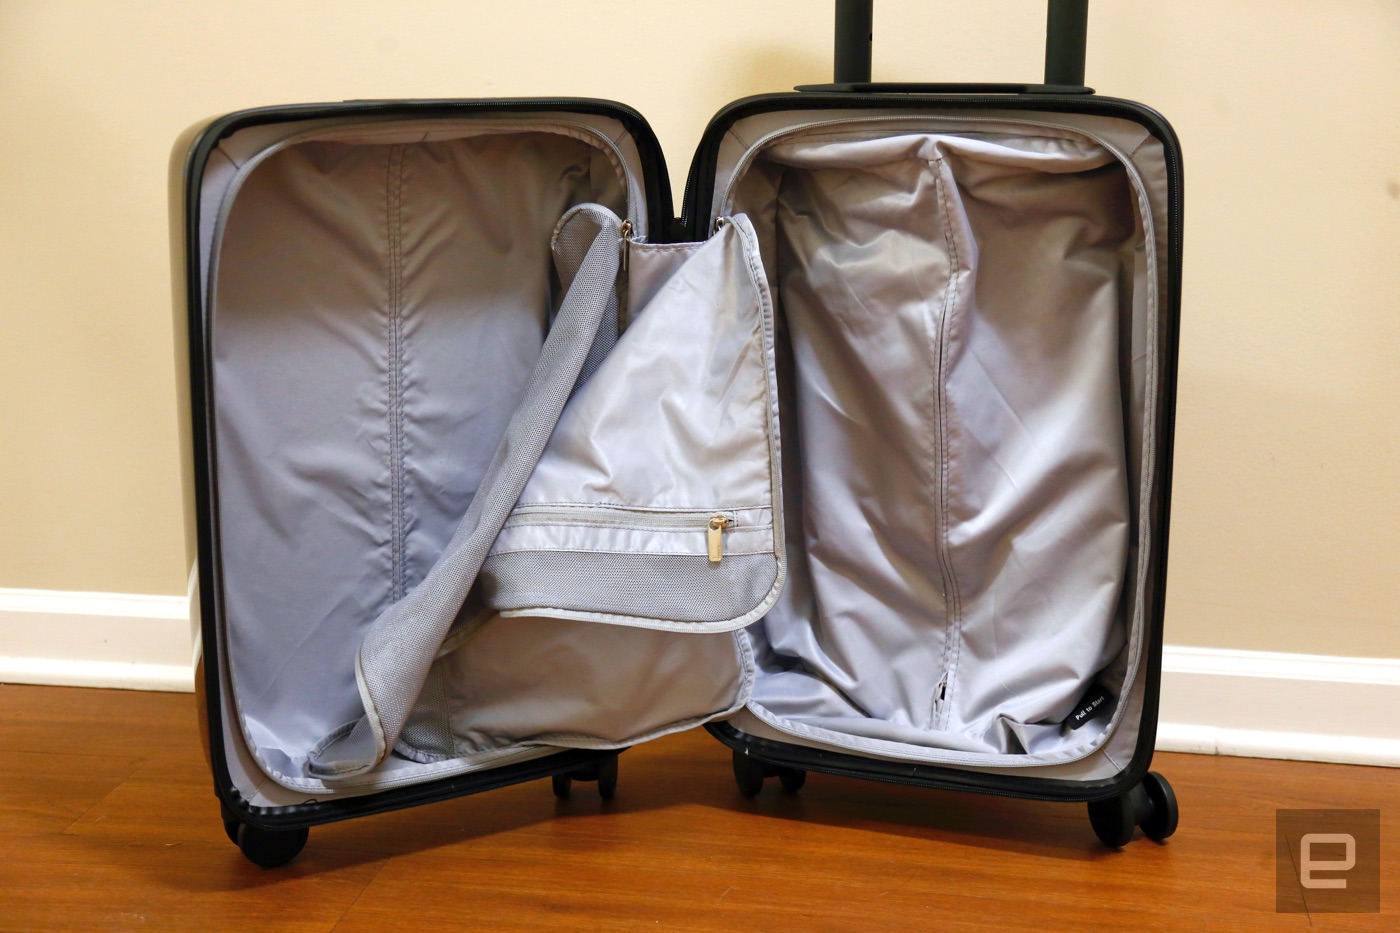 Raden's connected carry-on is sleek and smart, but cramped